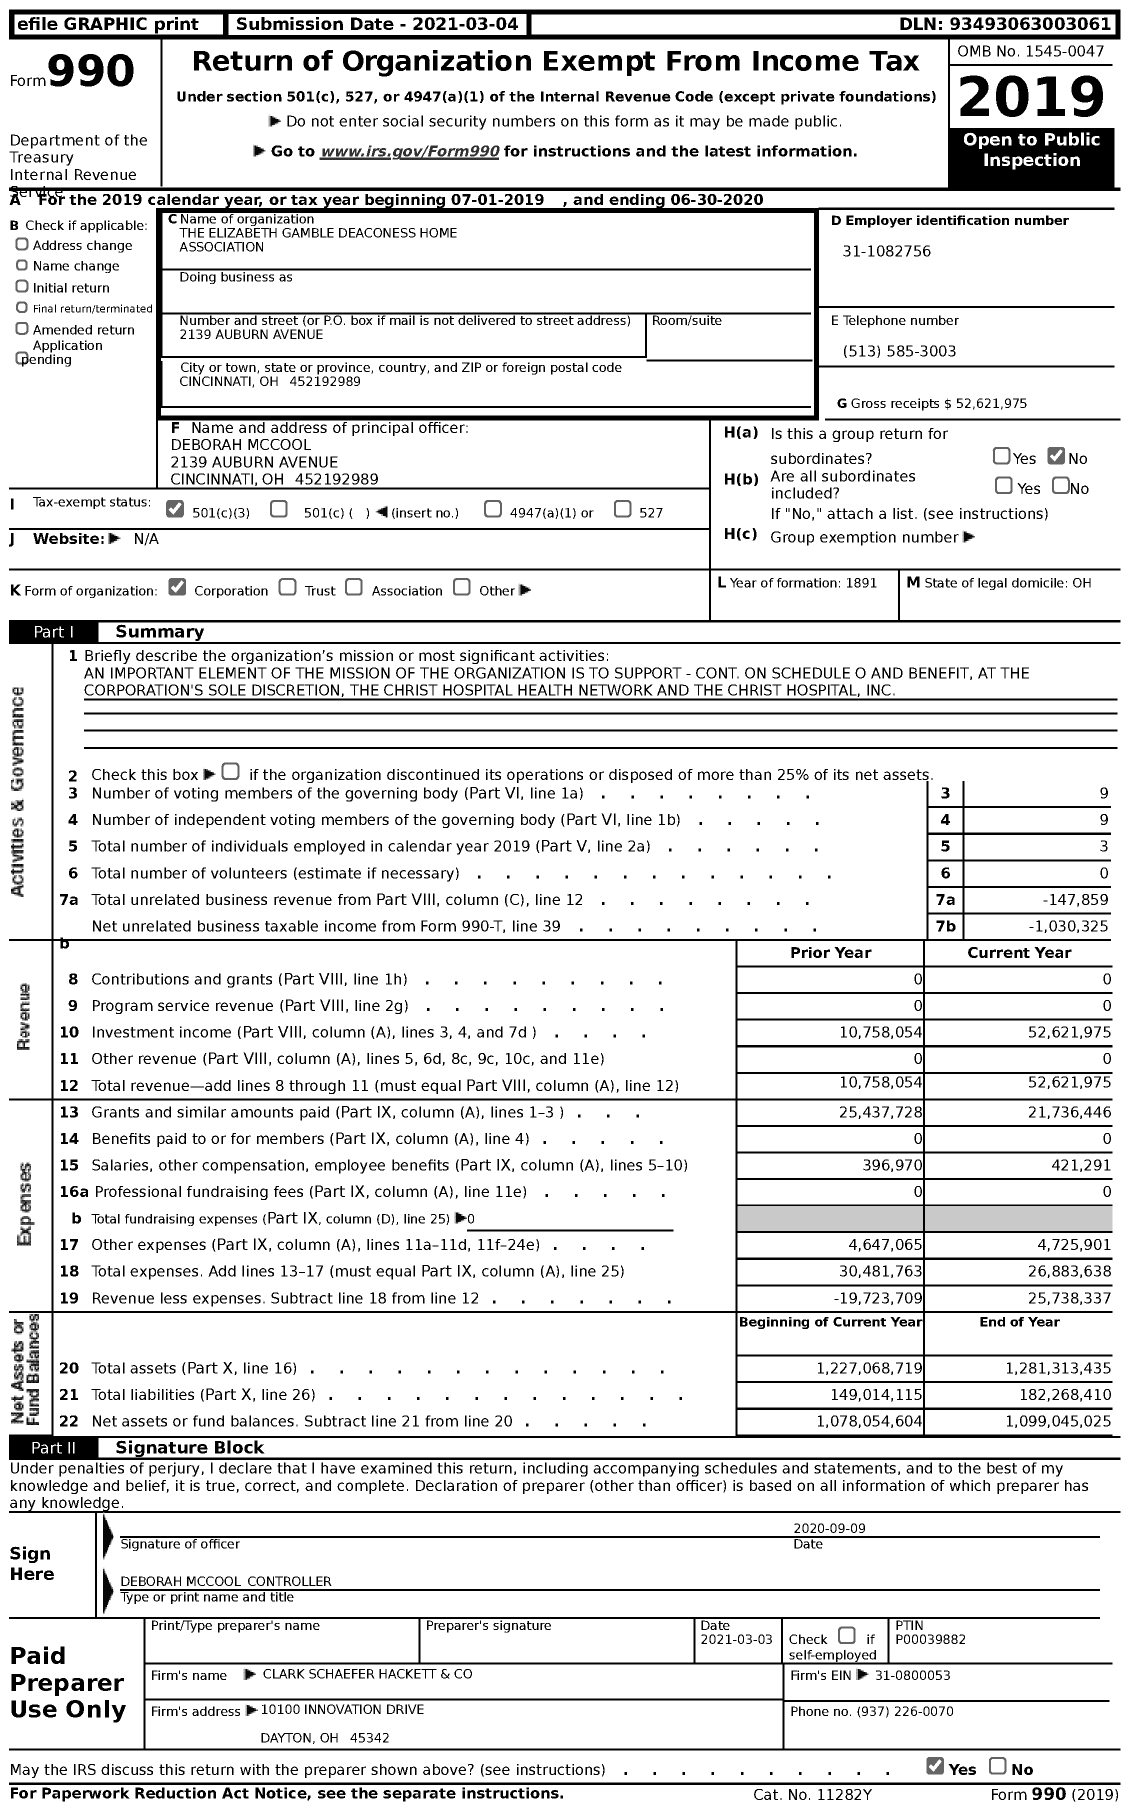 Image of first page of 2019 Form 990 for The Elizabeth Gamble Deaconess Home Association